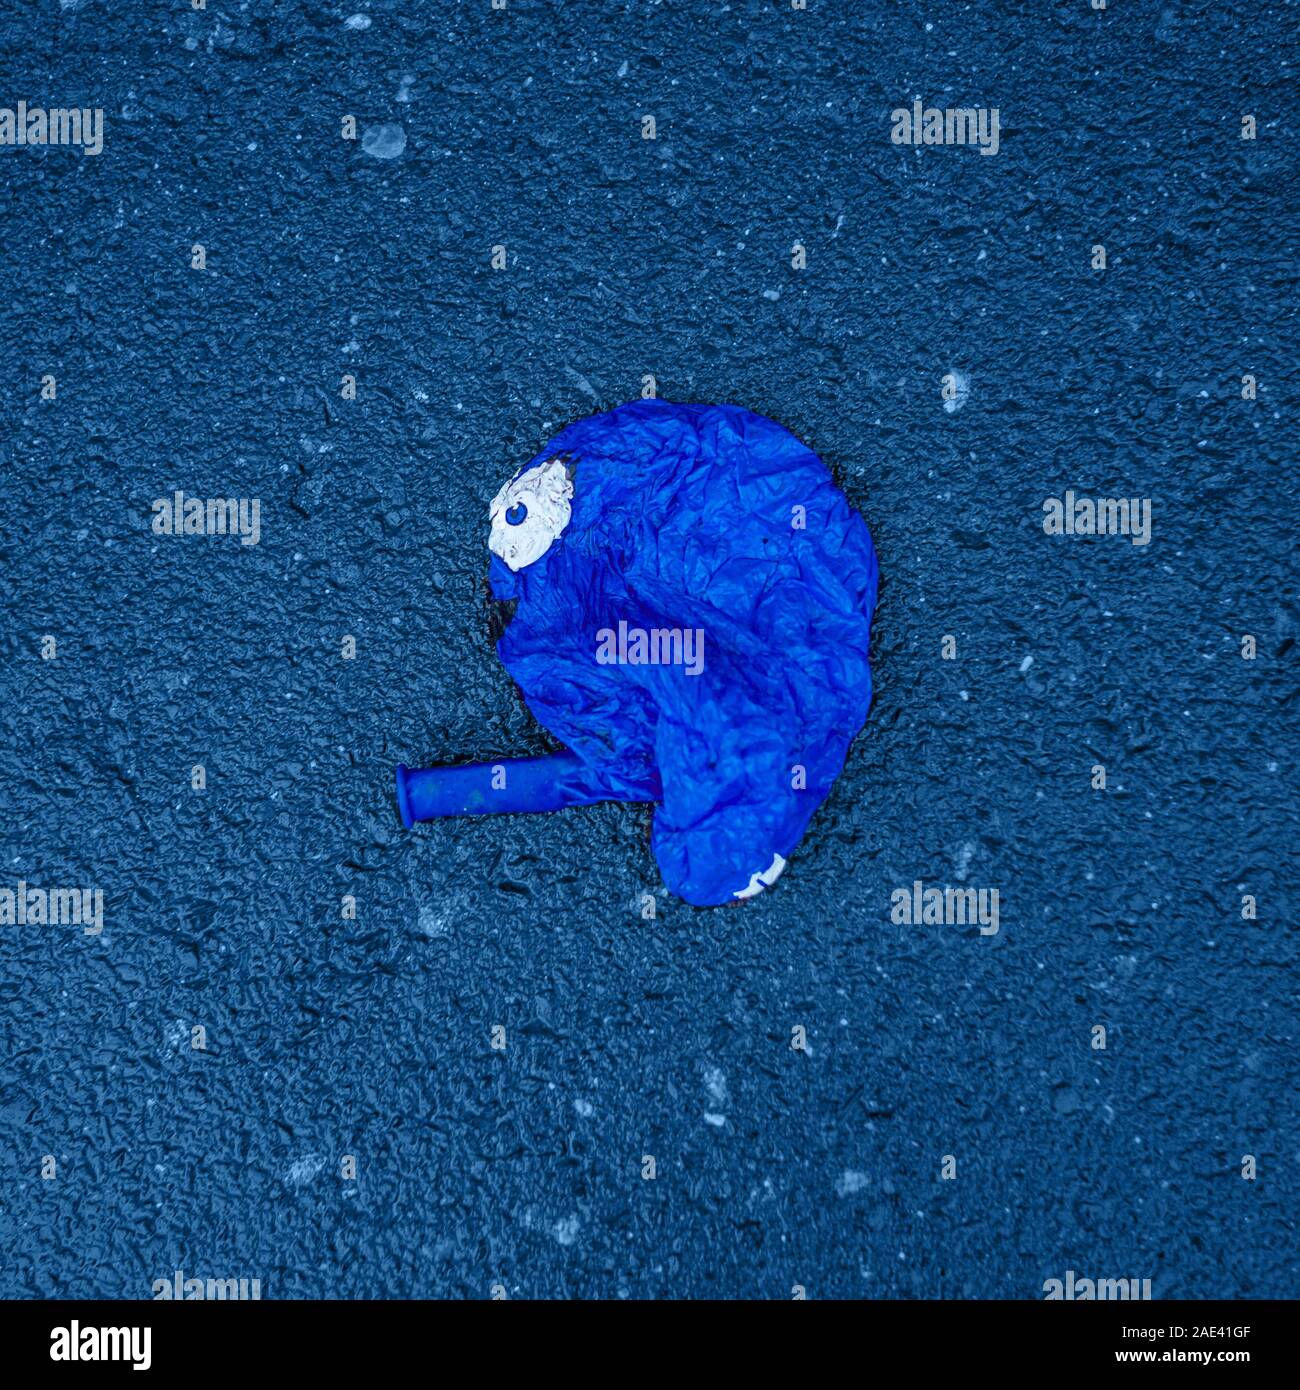 A puffed up blue air balloon with a funny face lies on the pavement. Stock Photo